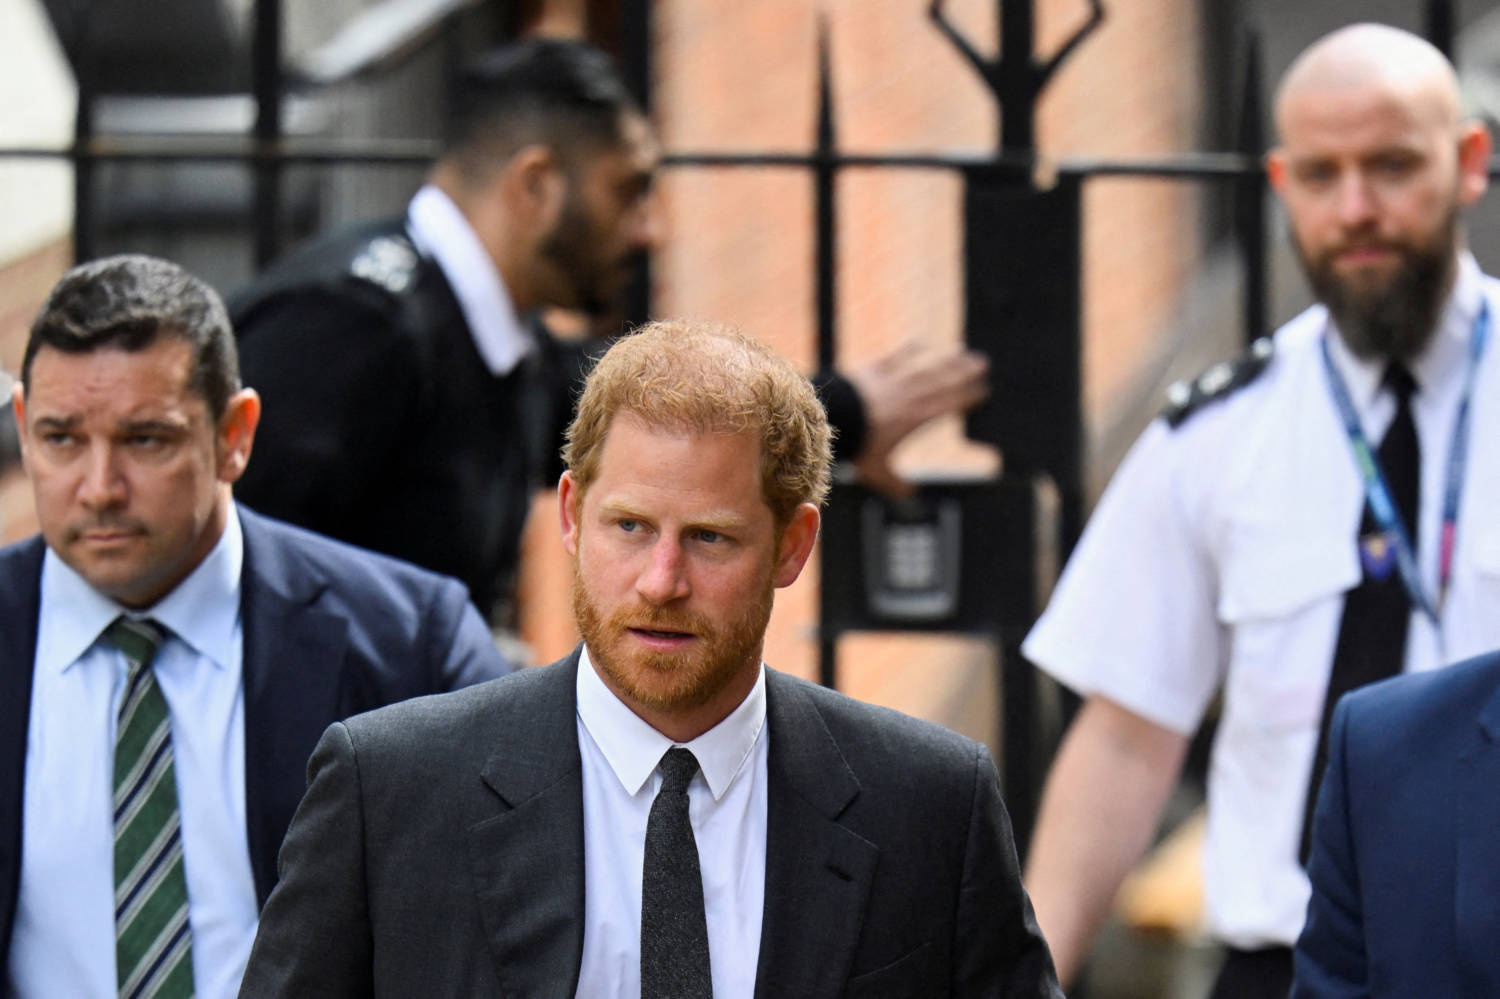 File Photo: Uk Paper Group Associated Newspapers Bids To Throw Out Prince Harry And Others' Privacy Lawsuits